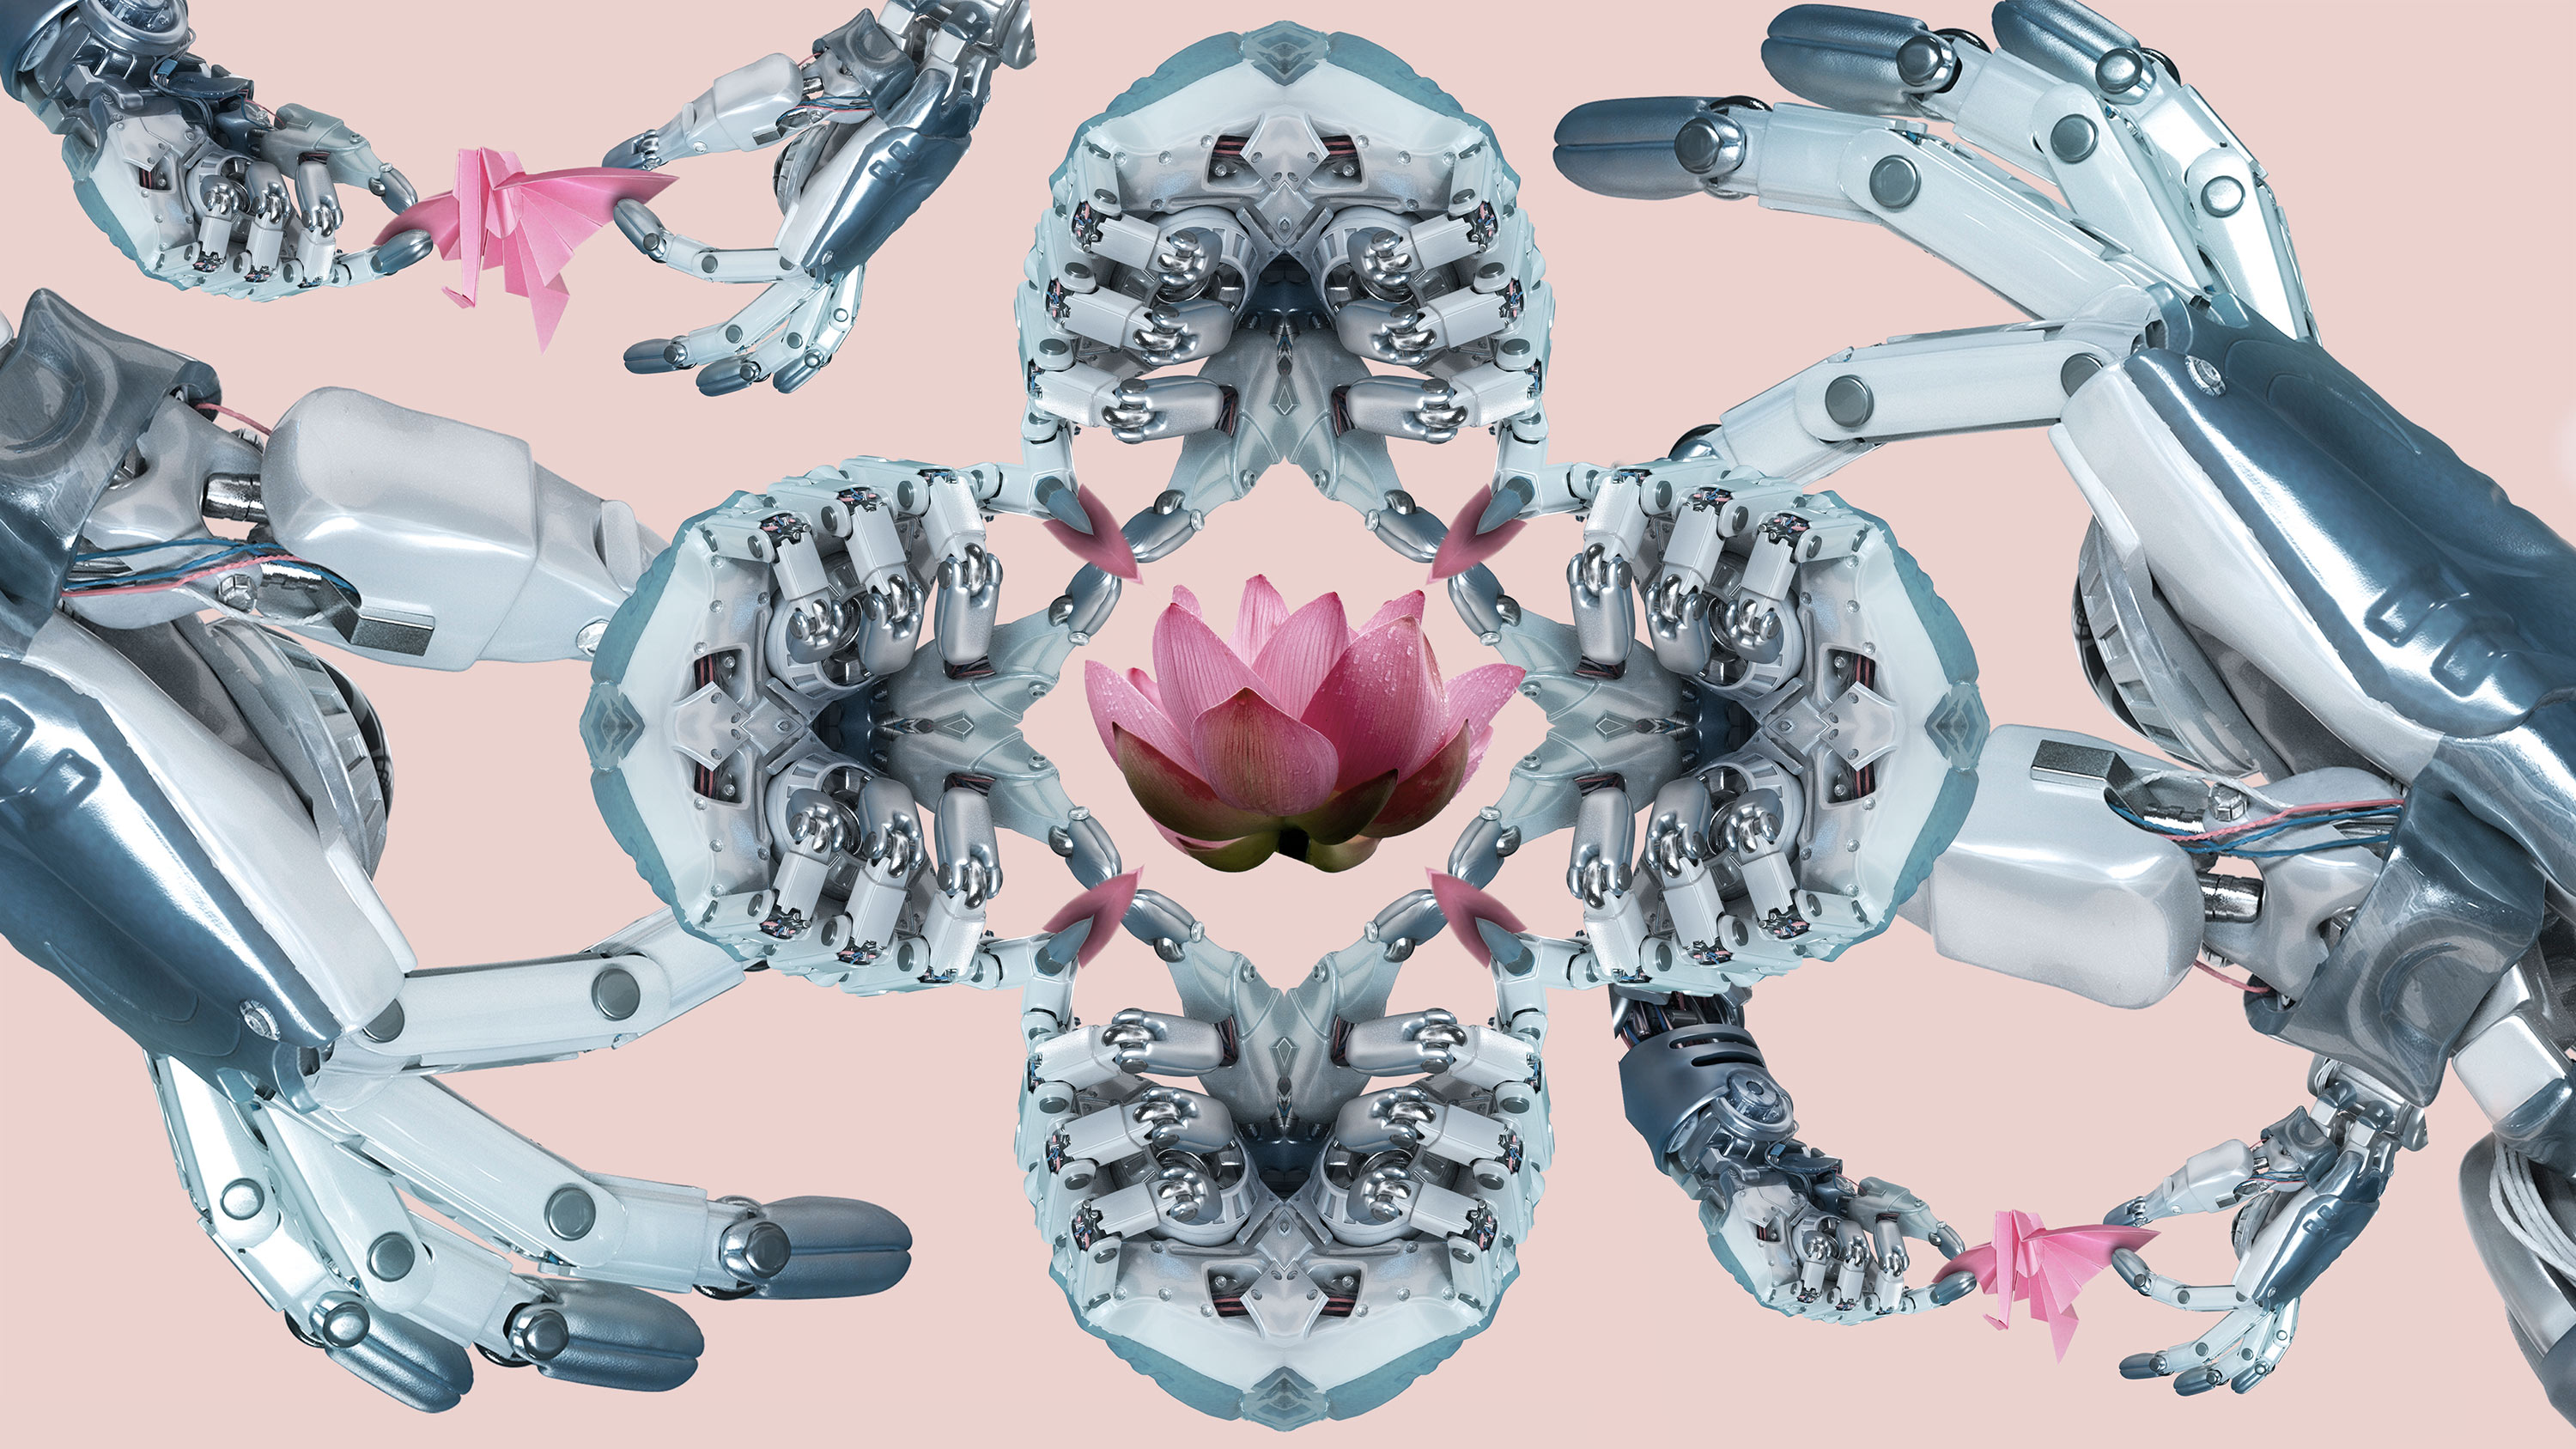 image of robot hands creating spiral design with lotus in the middle of gears and millennial pink background mandala buddhism buddhist